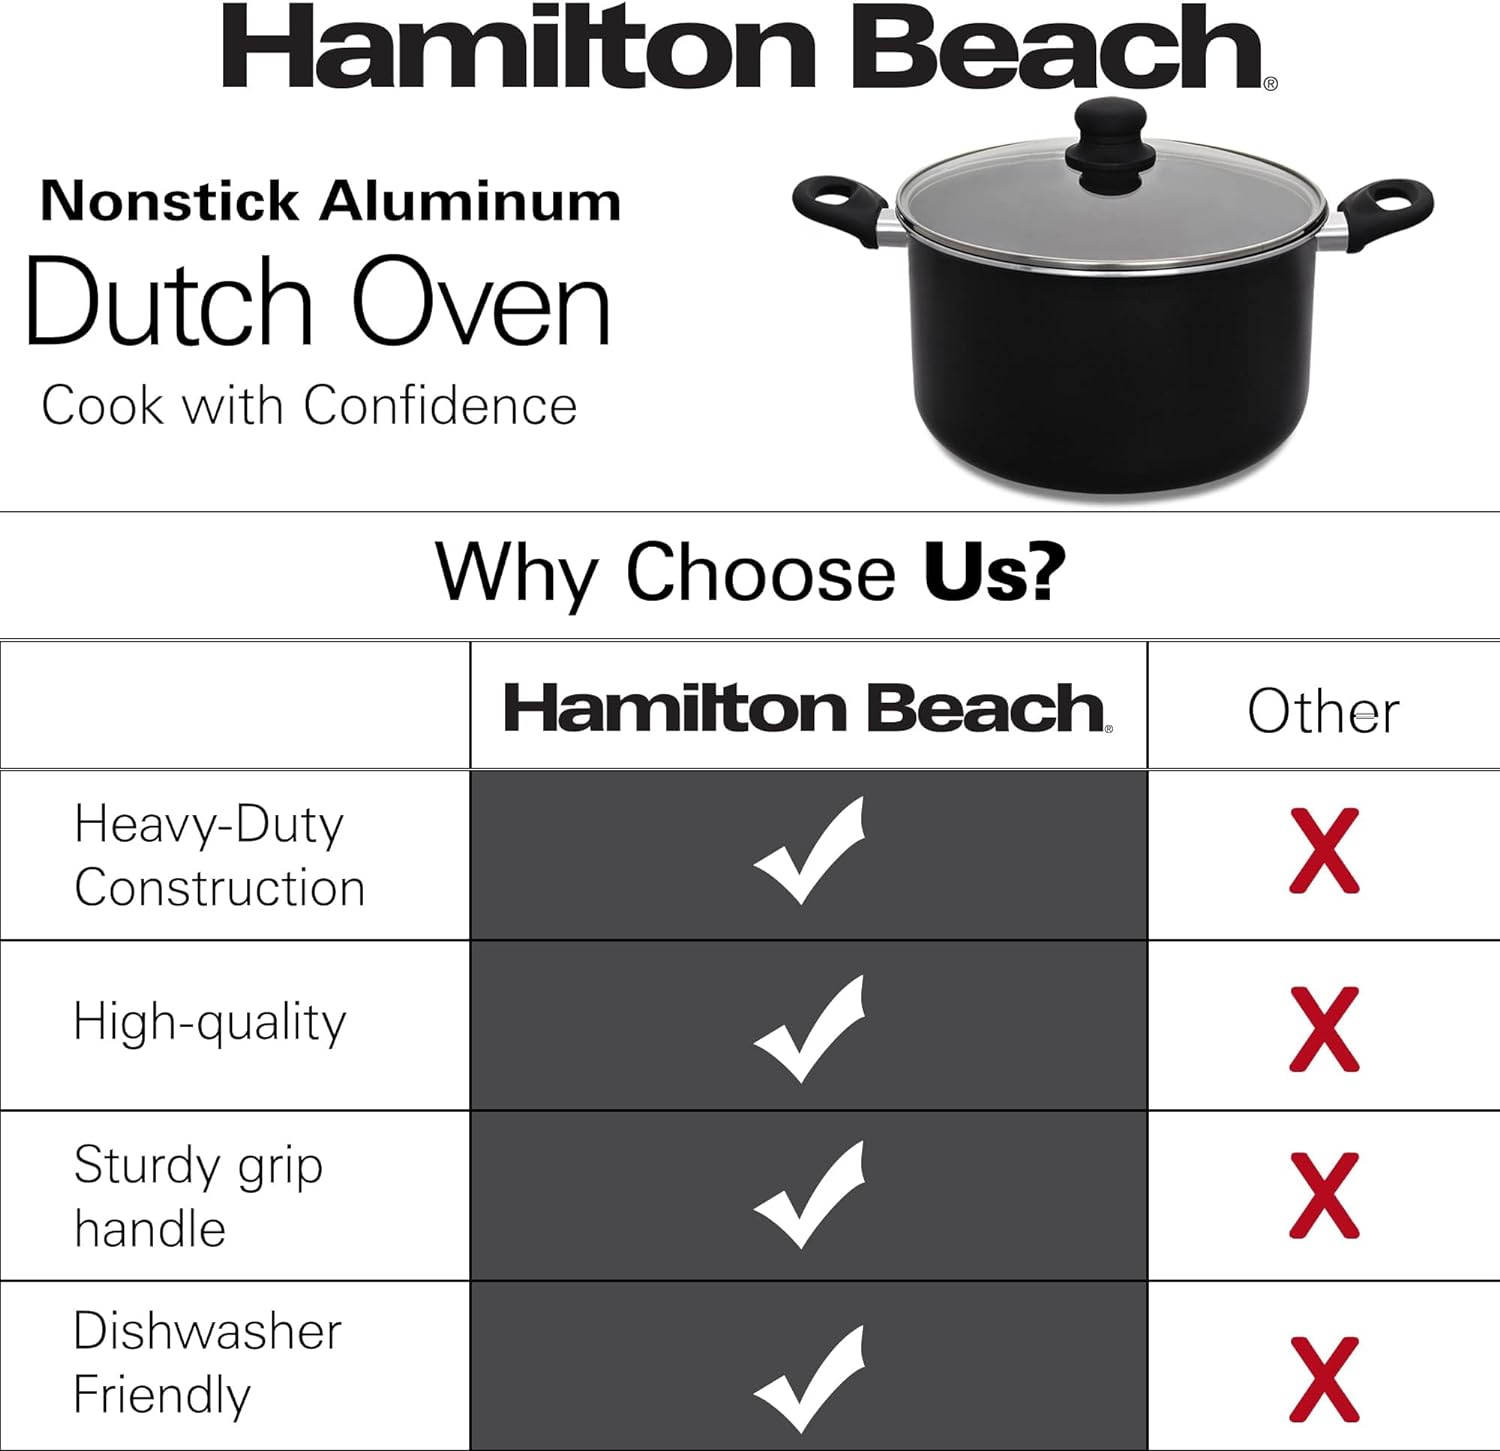 Hamilton Beach 8.5 Quart Nonstick Marble Coating Even Heating Round Dutch Oven Pot with Glass Lid and Wooden Like Soft Touch Handle, Dutch Oven Pot, Braising, Roasting